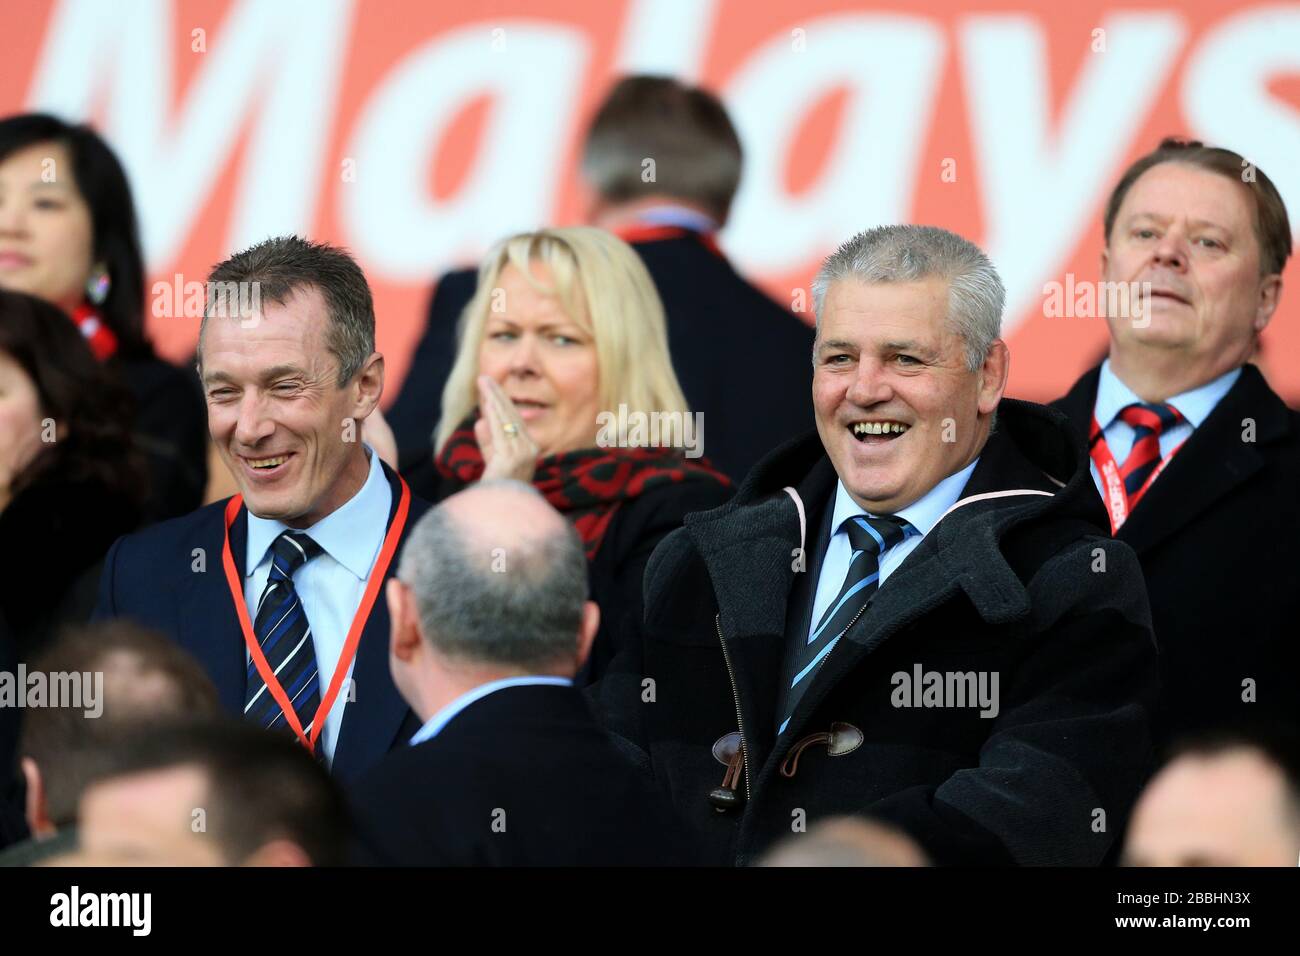 Wales Rugby Union coach Rob Howley (left) with British Lions coach Warren Gatland (right) in the stands Stock Photo